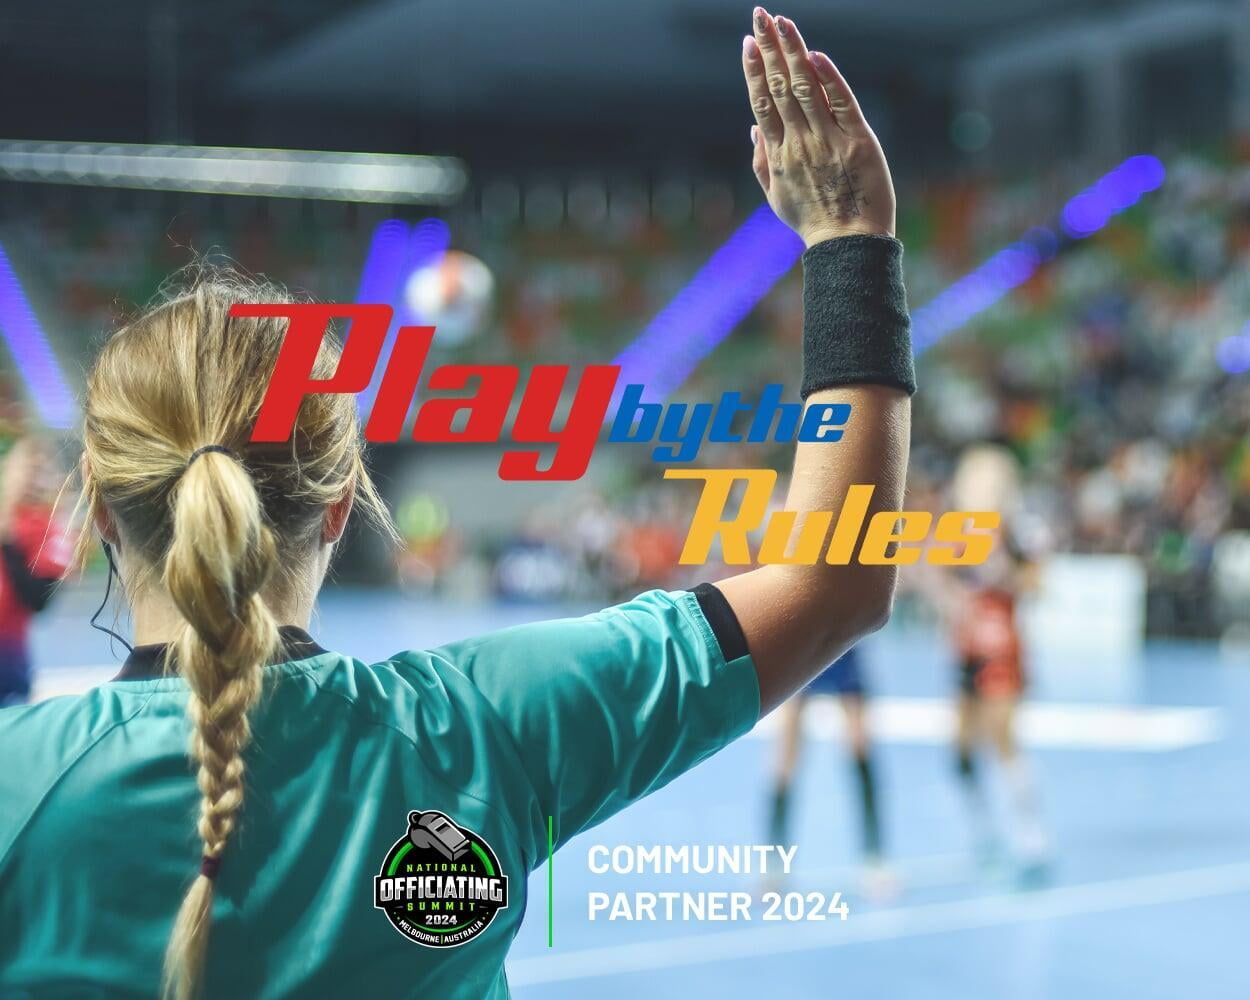 NATIONAL OFFICIATING SUMMIT ANNOUNCES PLAY BY THE RULES AS COMMUNITY PARTNER